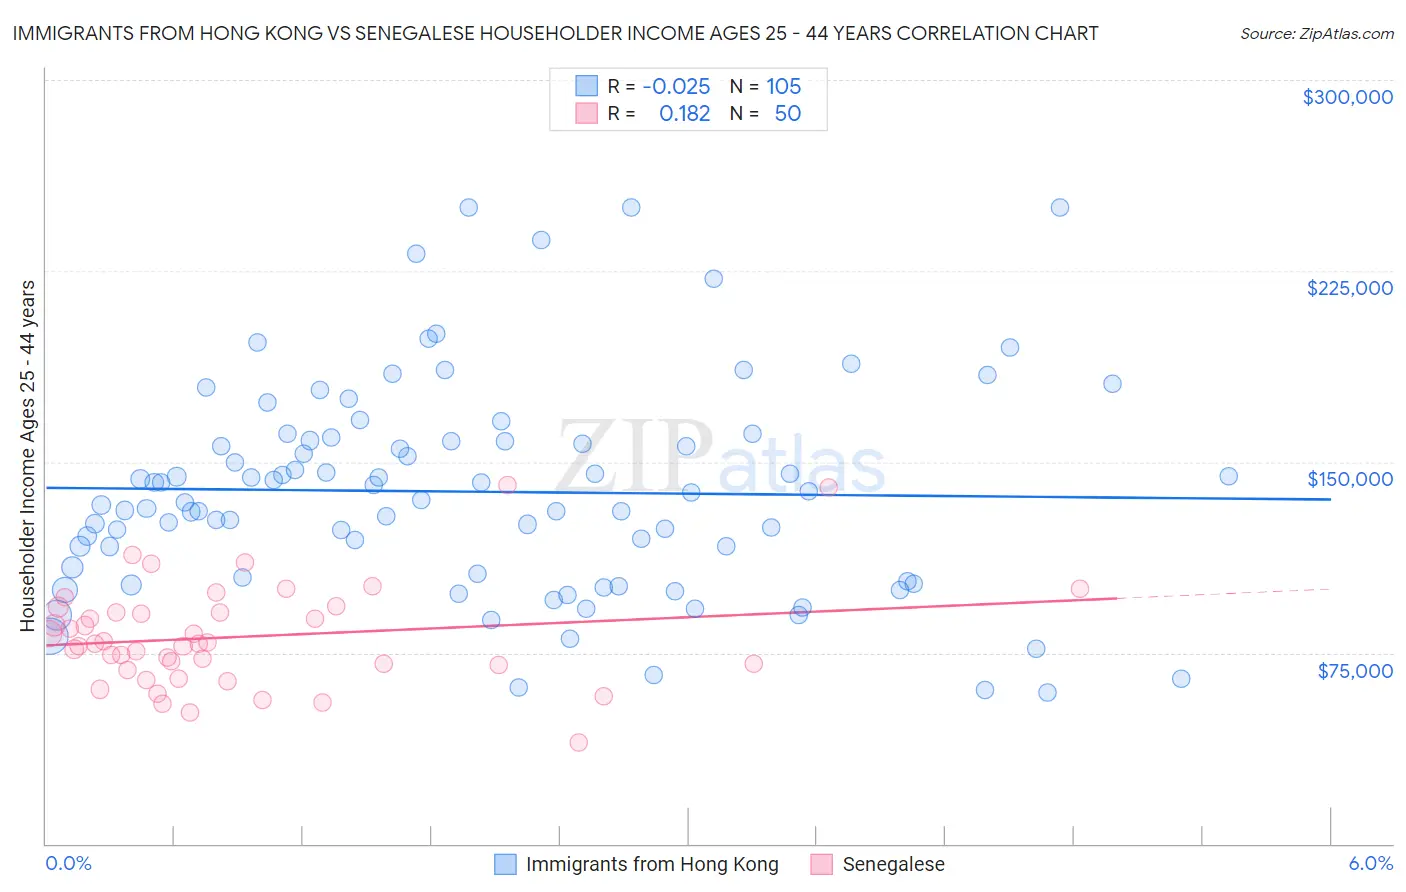 Immigrants from Hong Kong vs Senegalese Householder Income Ages 25 - 44 years